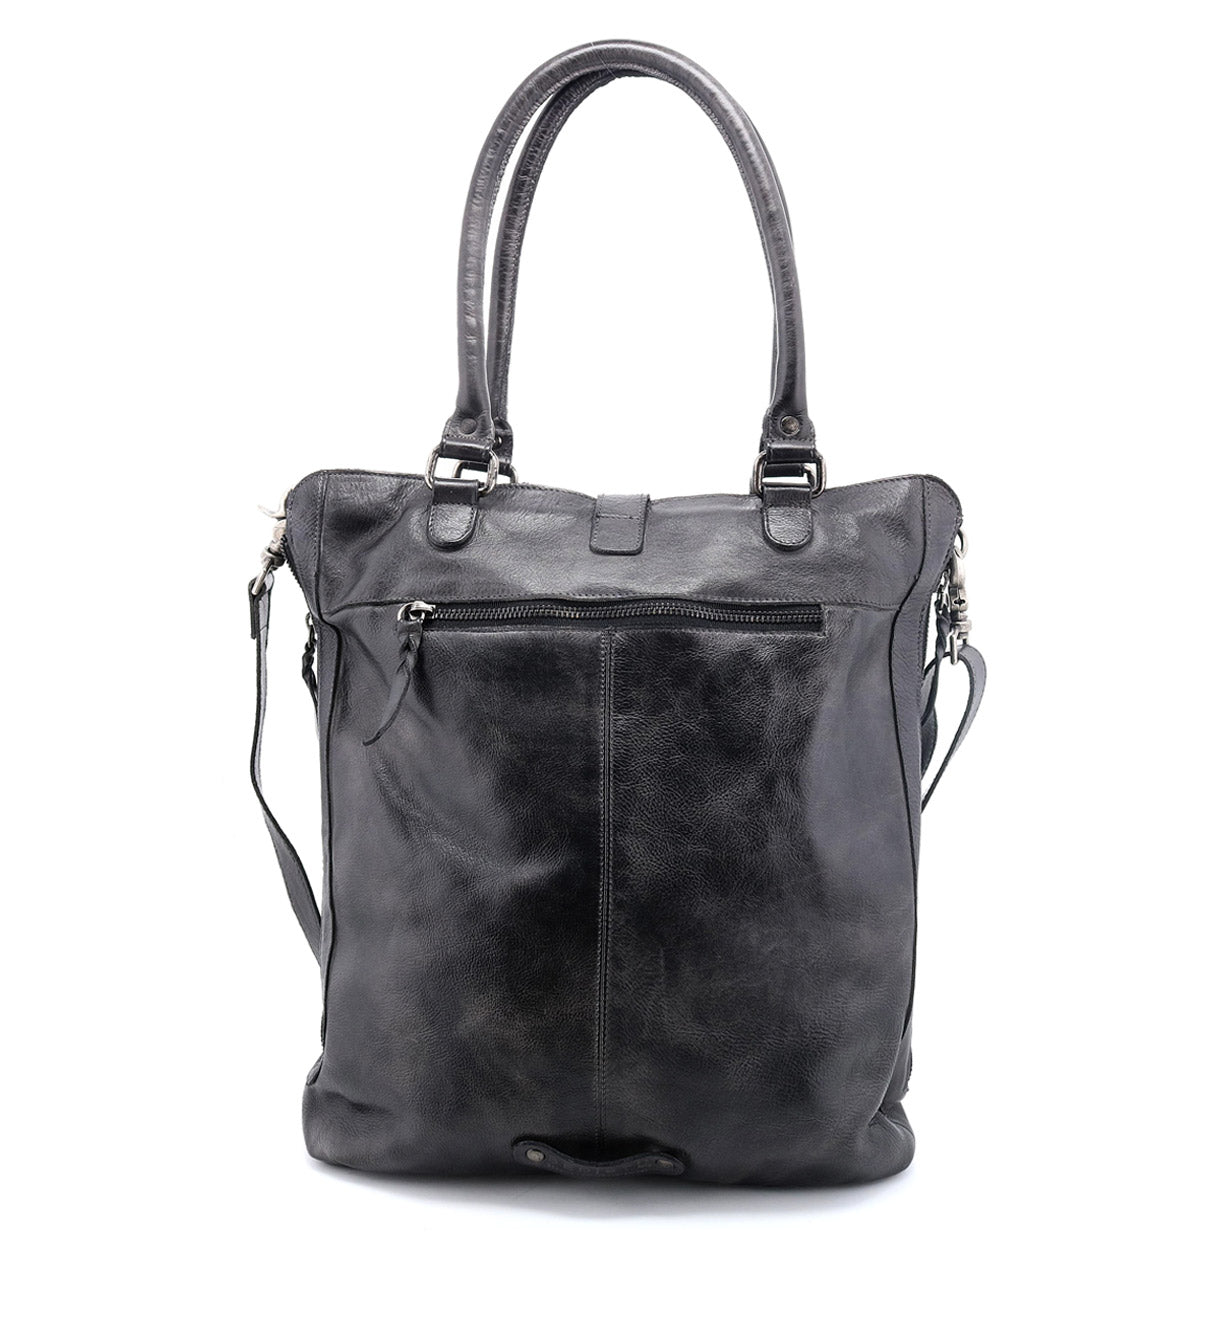 A black leather Mildred tote bag by Bed Stu with a shoulder strap.